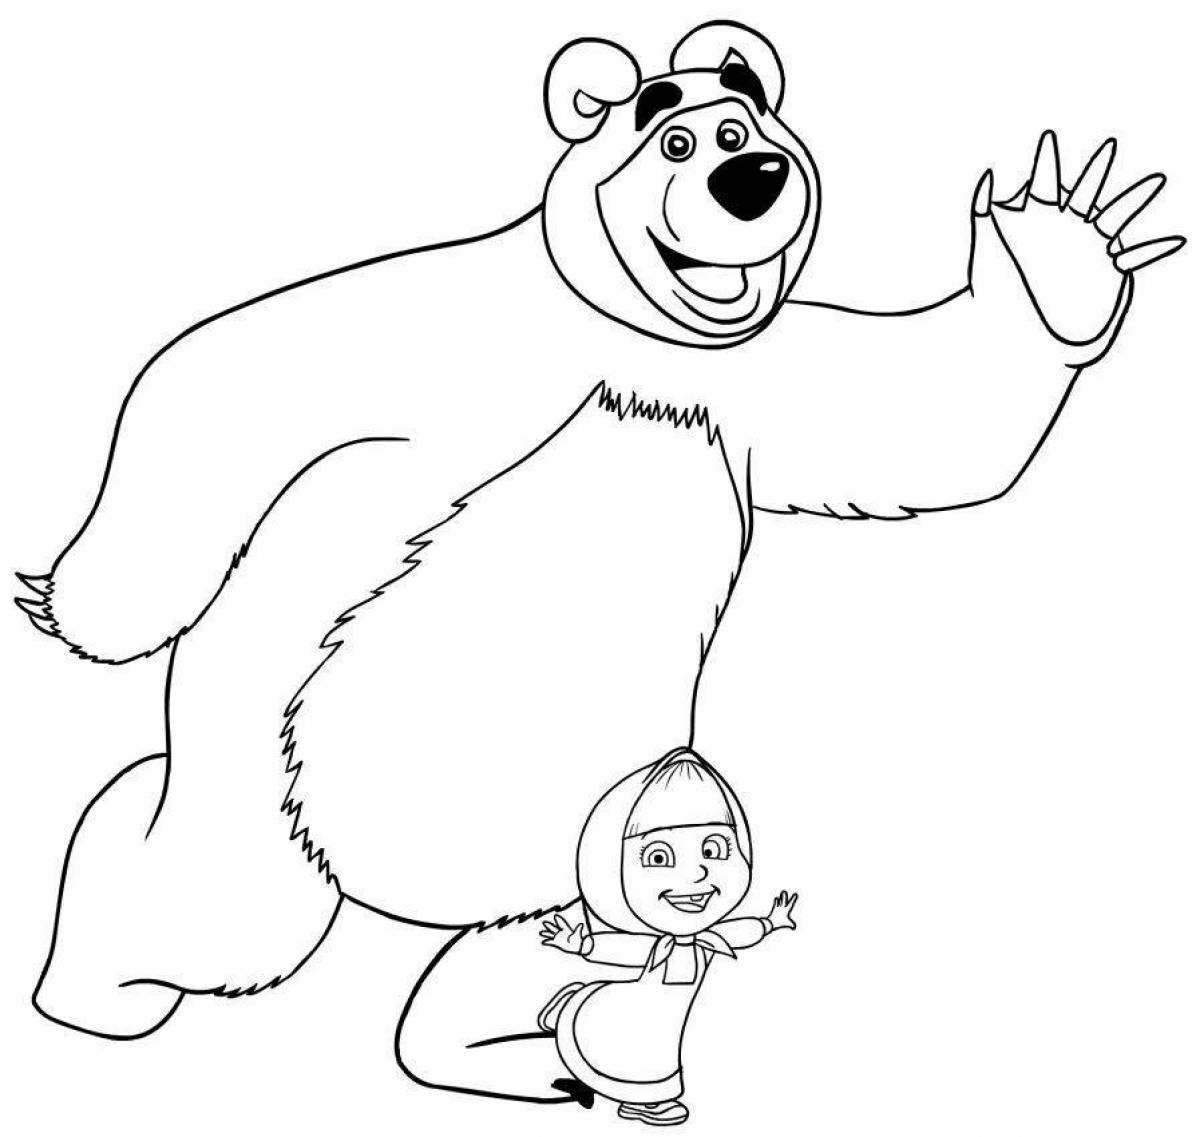 Delightful drawing of masha and the bear